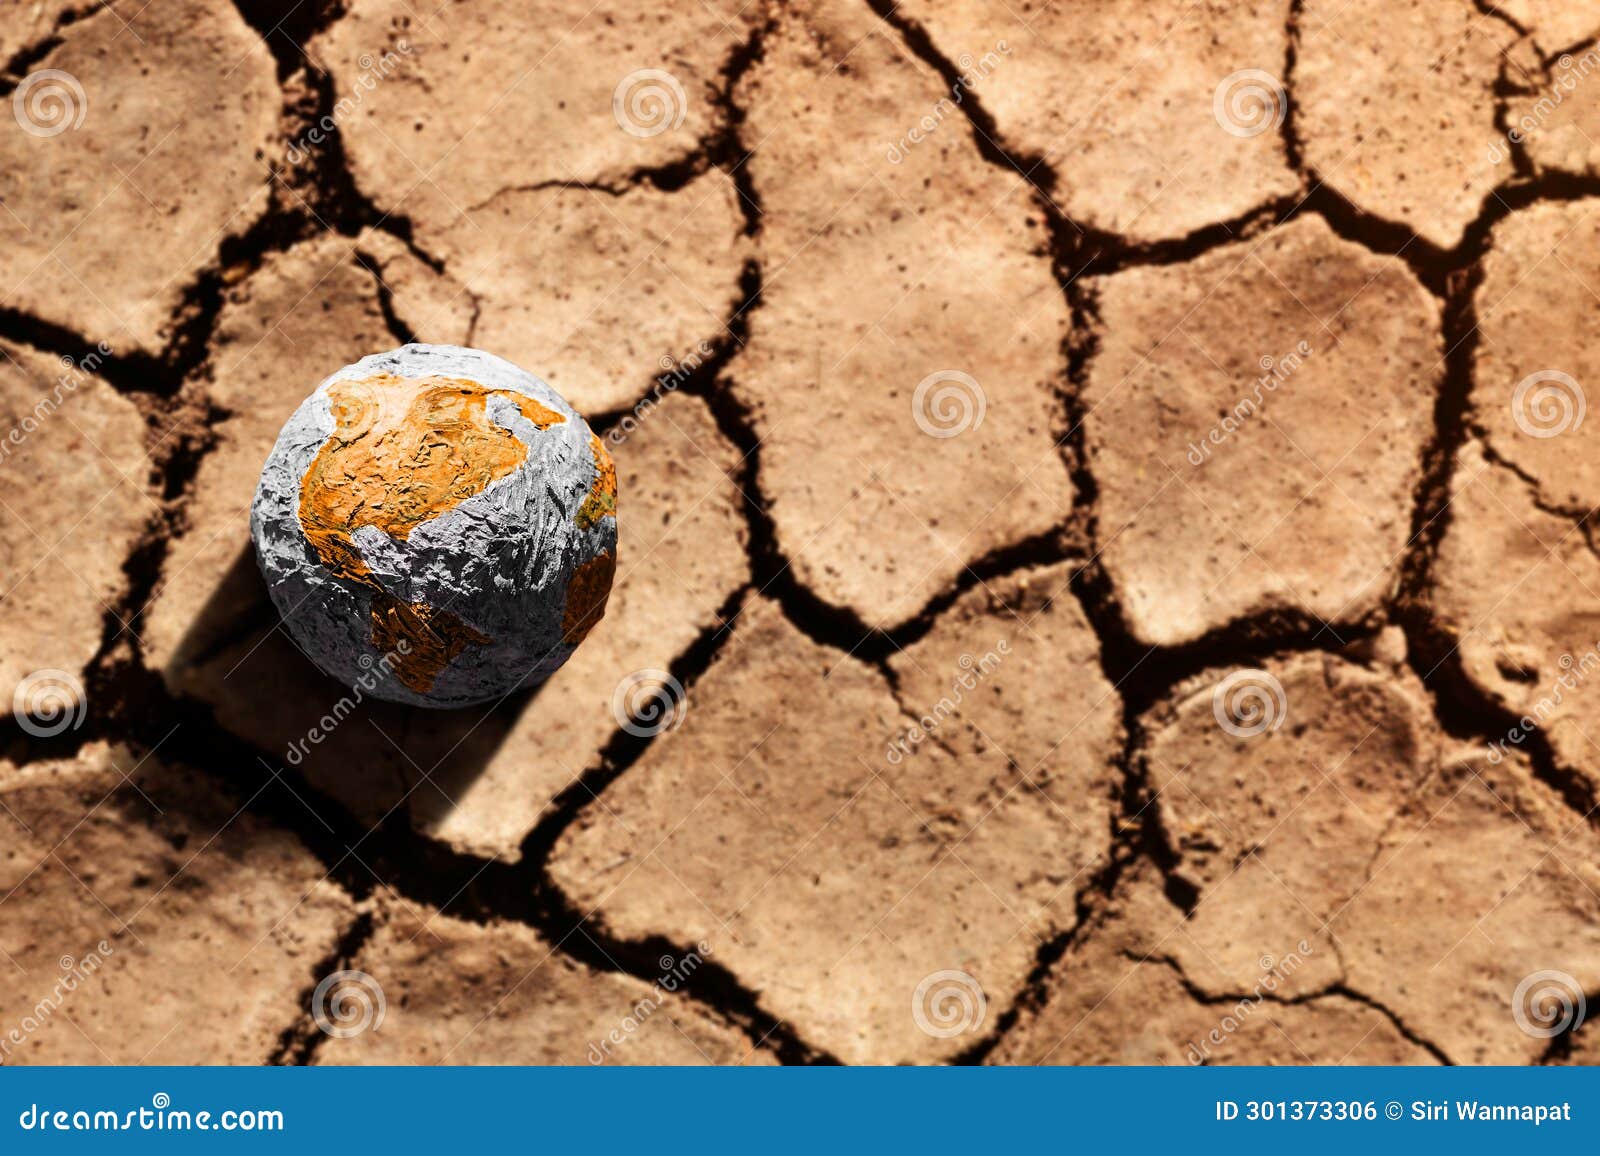 water crisis, climate change, el nino, global warming issue concept. brown globe lay on cracked dry soil ground. land without